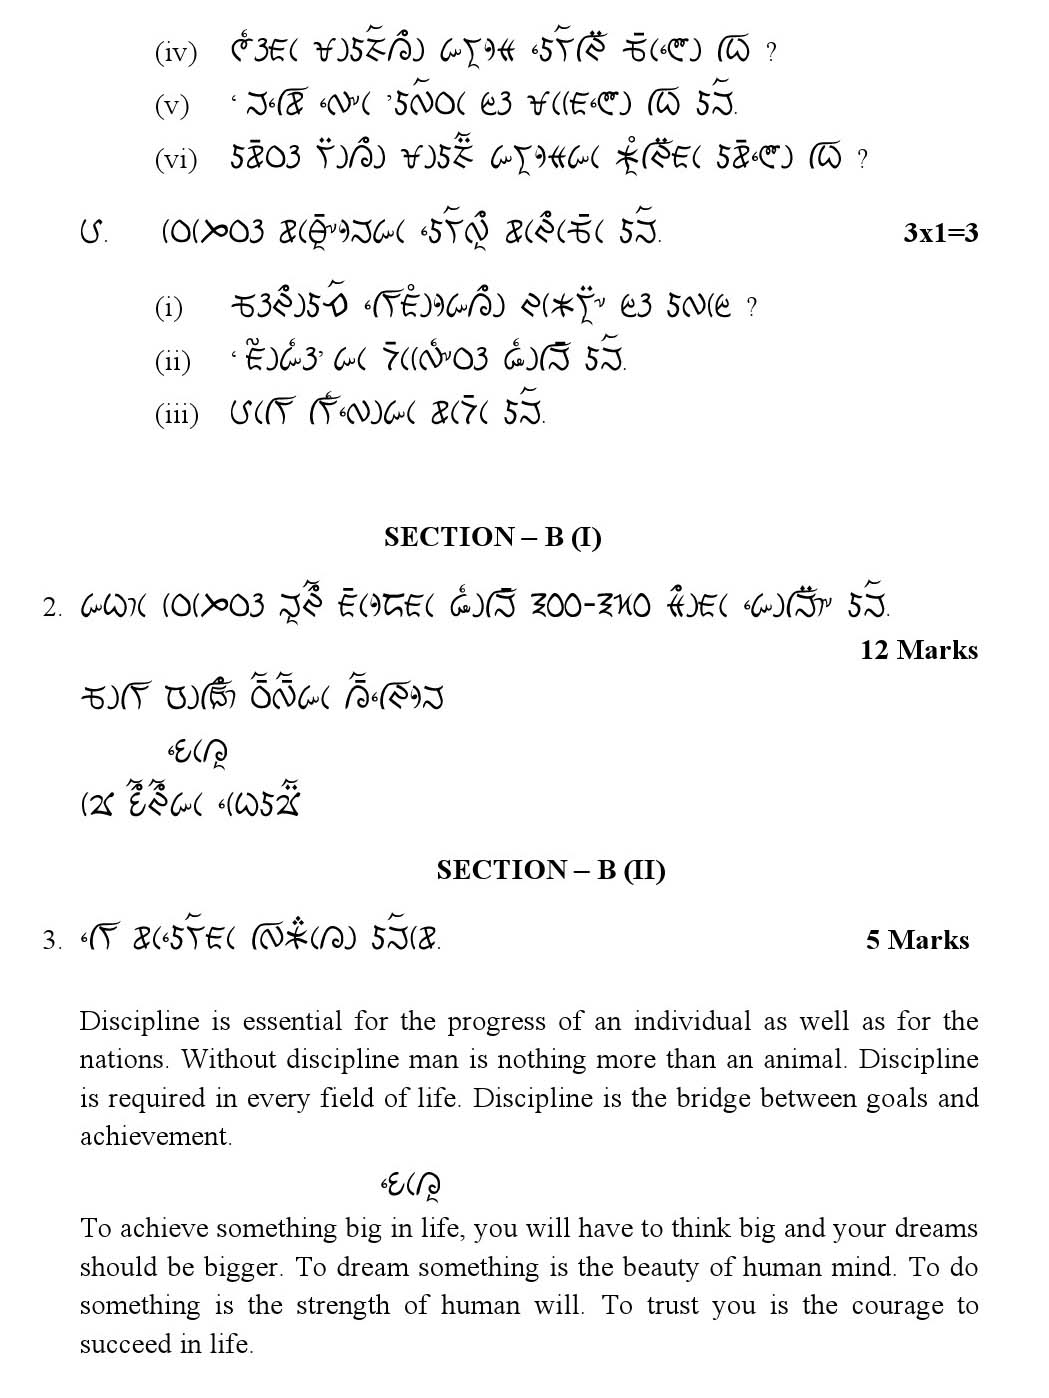 Lepcha CBSE Class X Sample Question Paper 2018-19 - Image 3